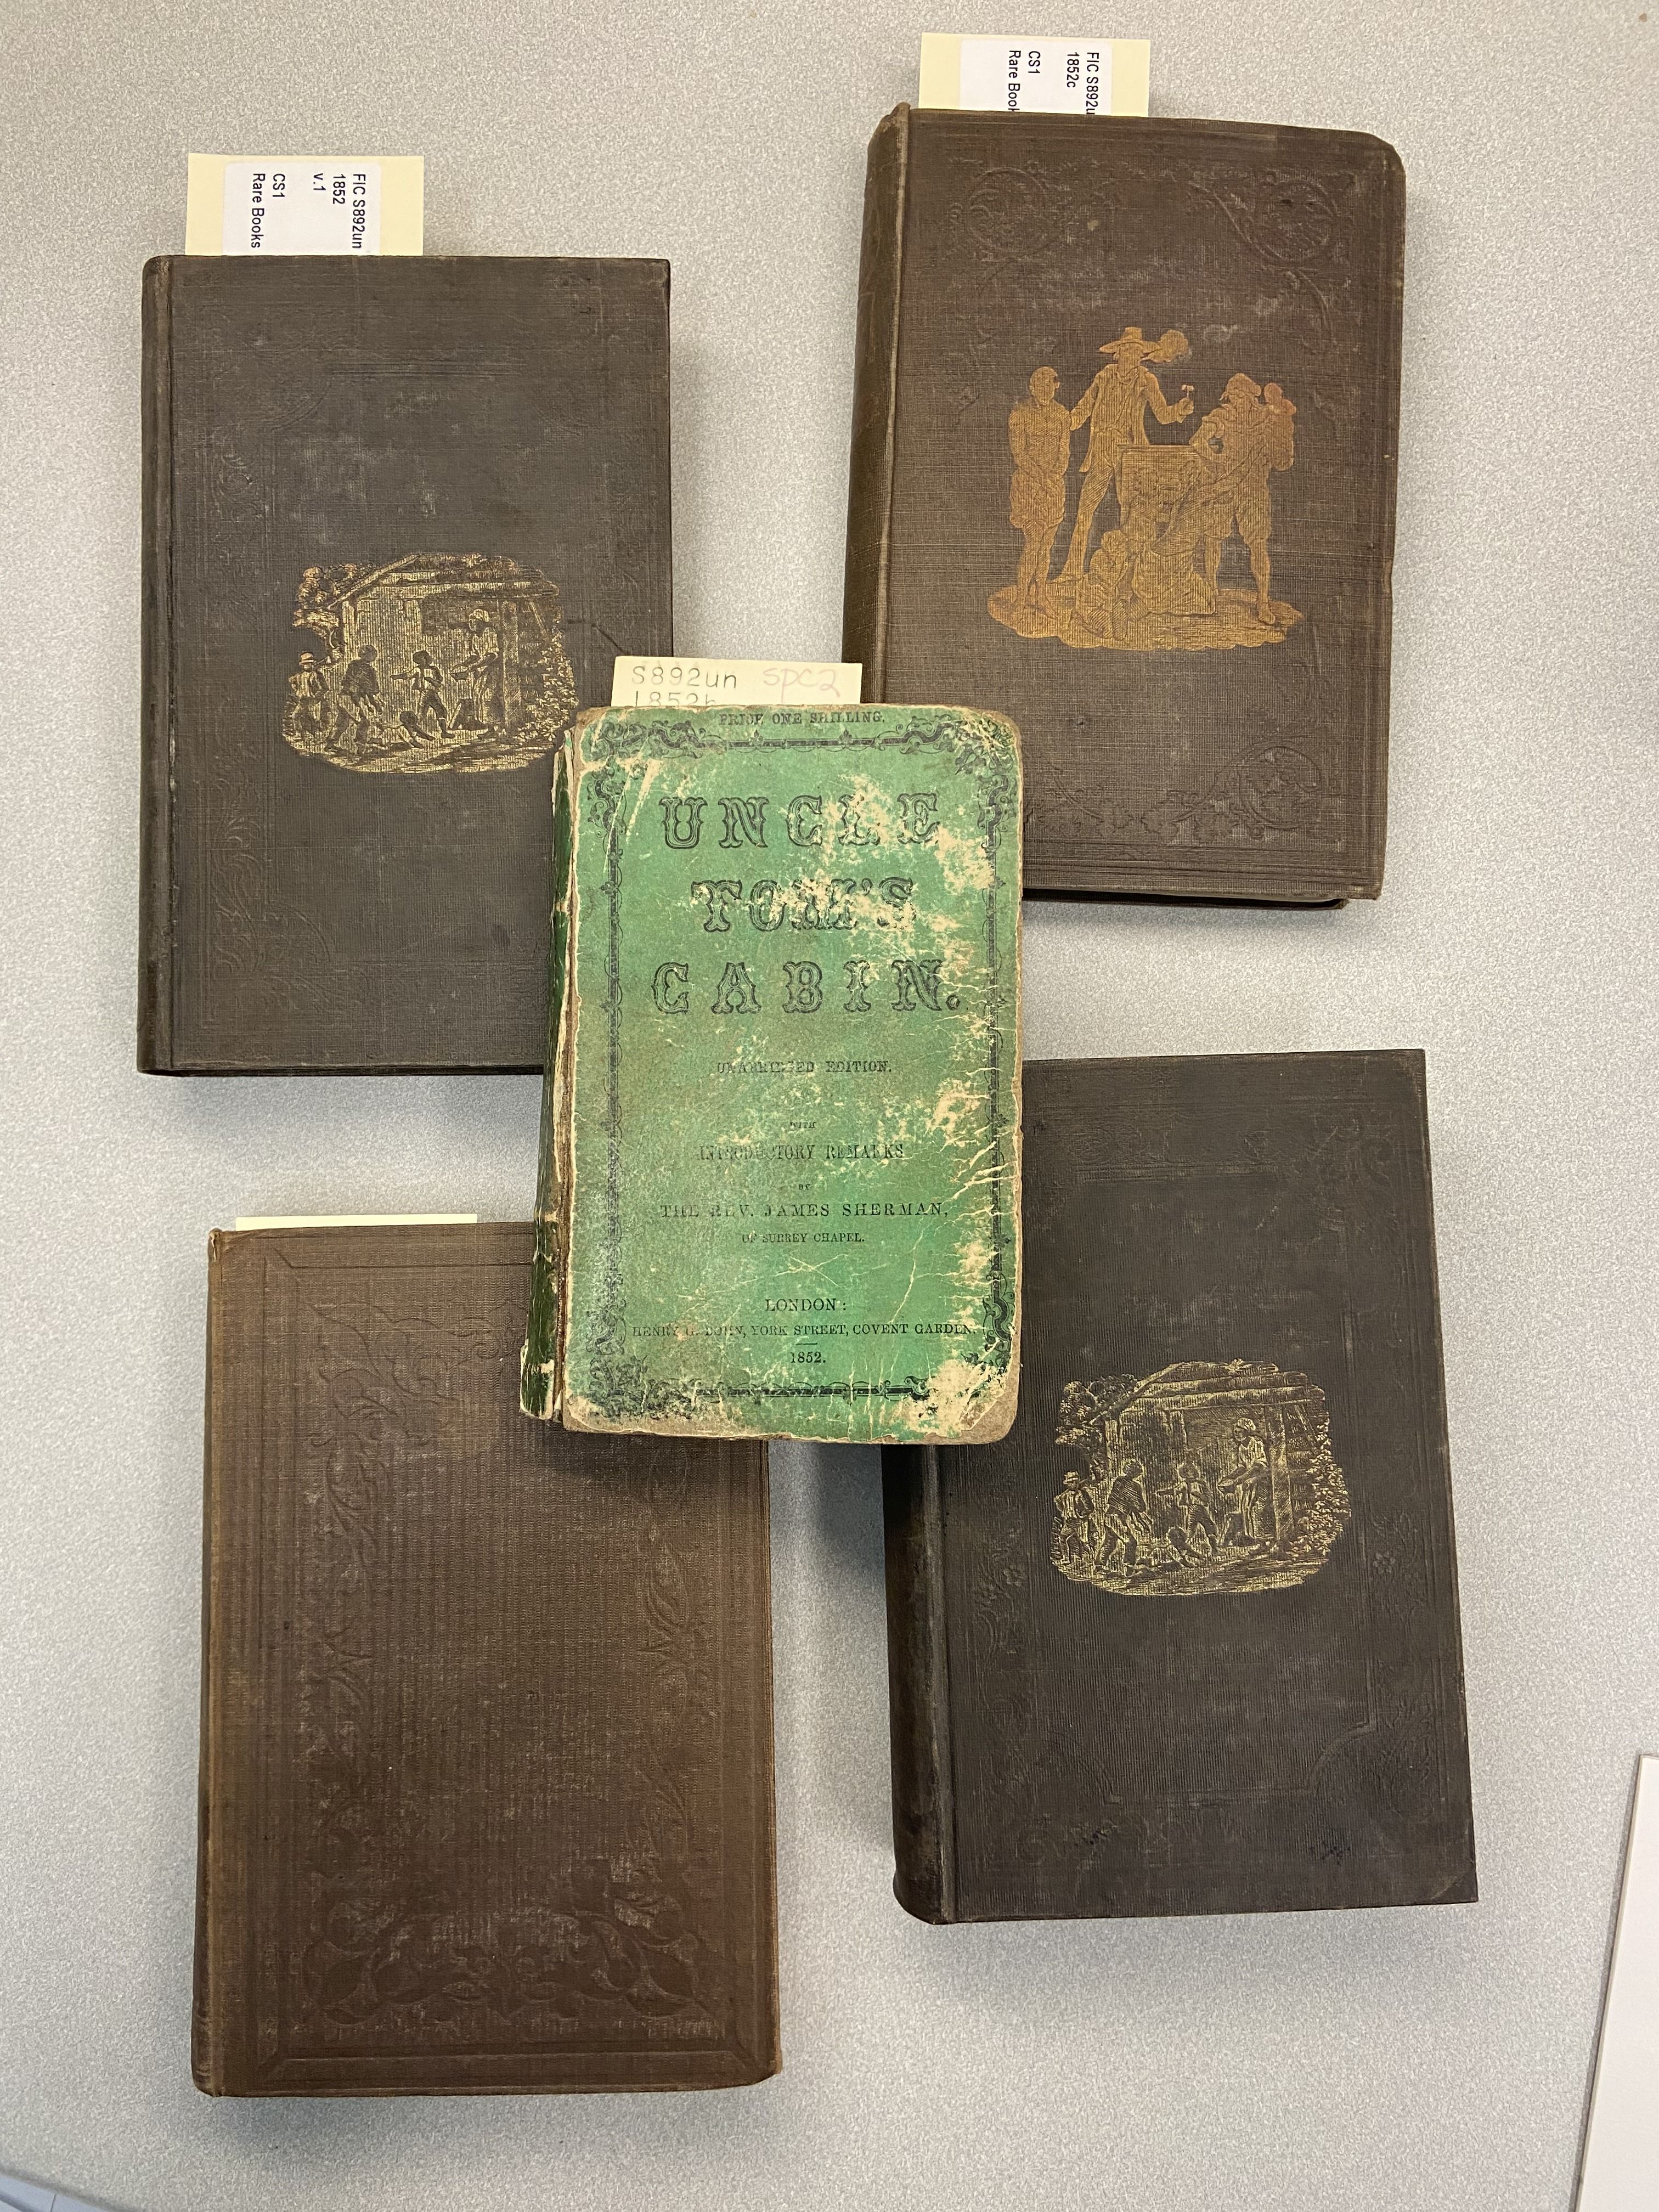 Pound periodicals Gold collection - Rare Books - Finding Aids - Digital  Collections